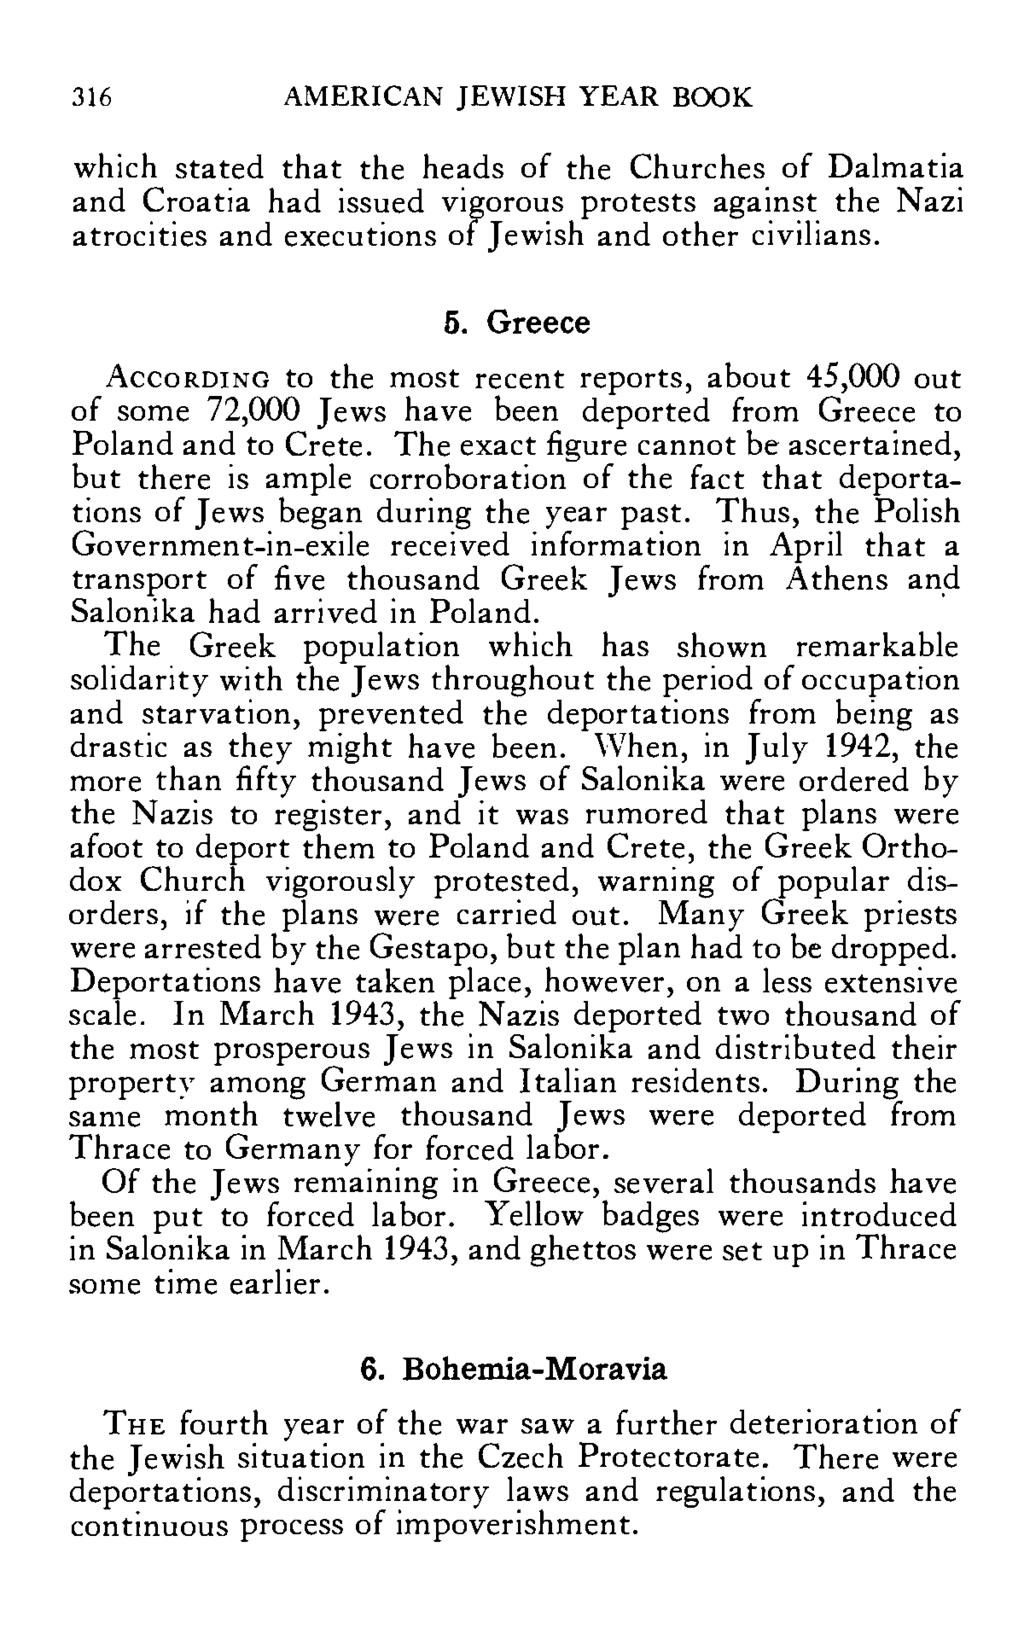 316 AMERICAN JEWISH YEAR BOOK which stated that the heads of the Churches of Dalmatia and Croatia had issued vigorous protests against the Nazi atrocities and executions of Jewish and other civilians.